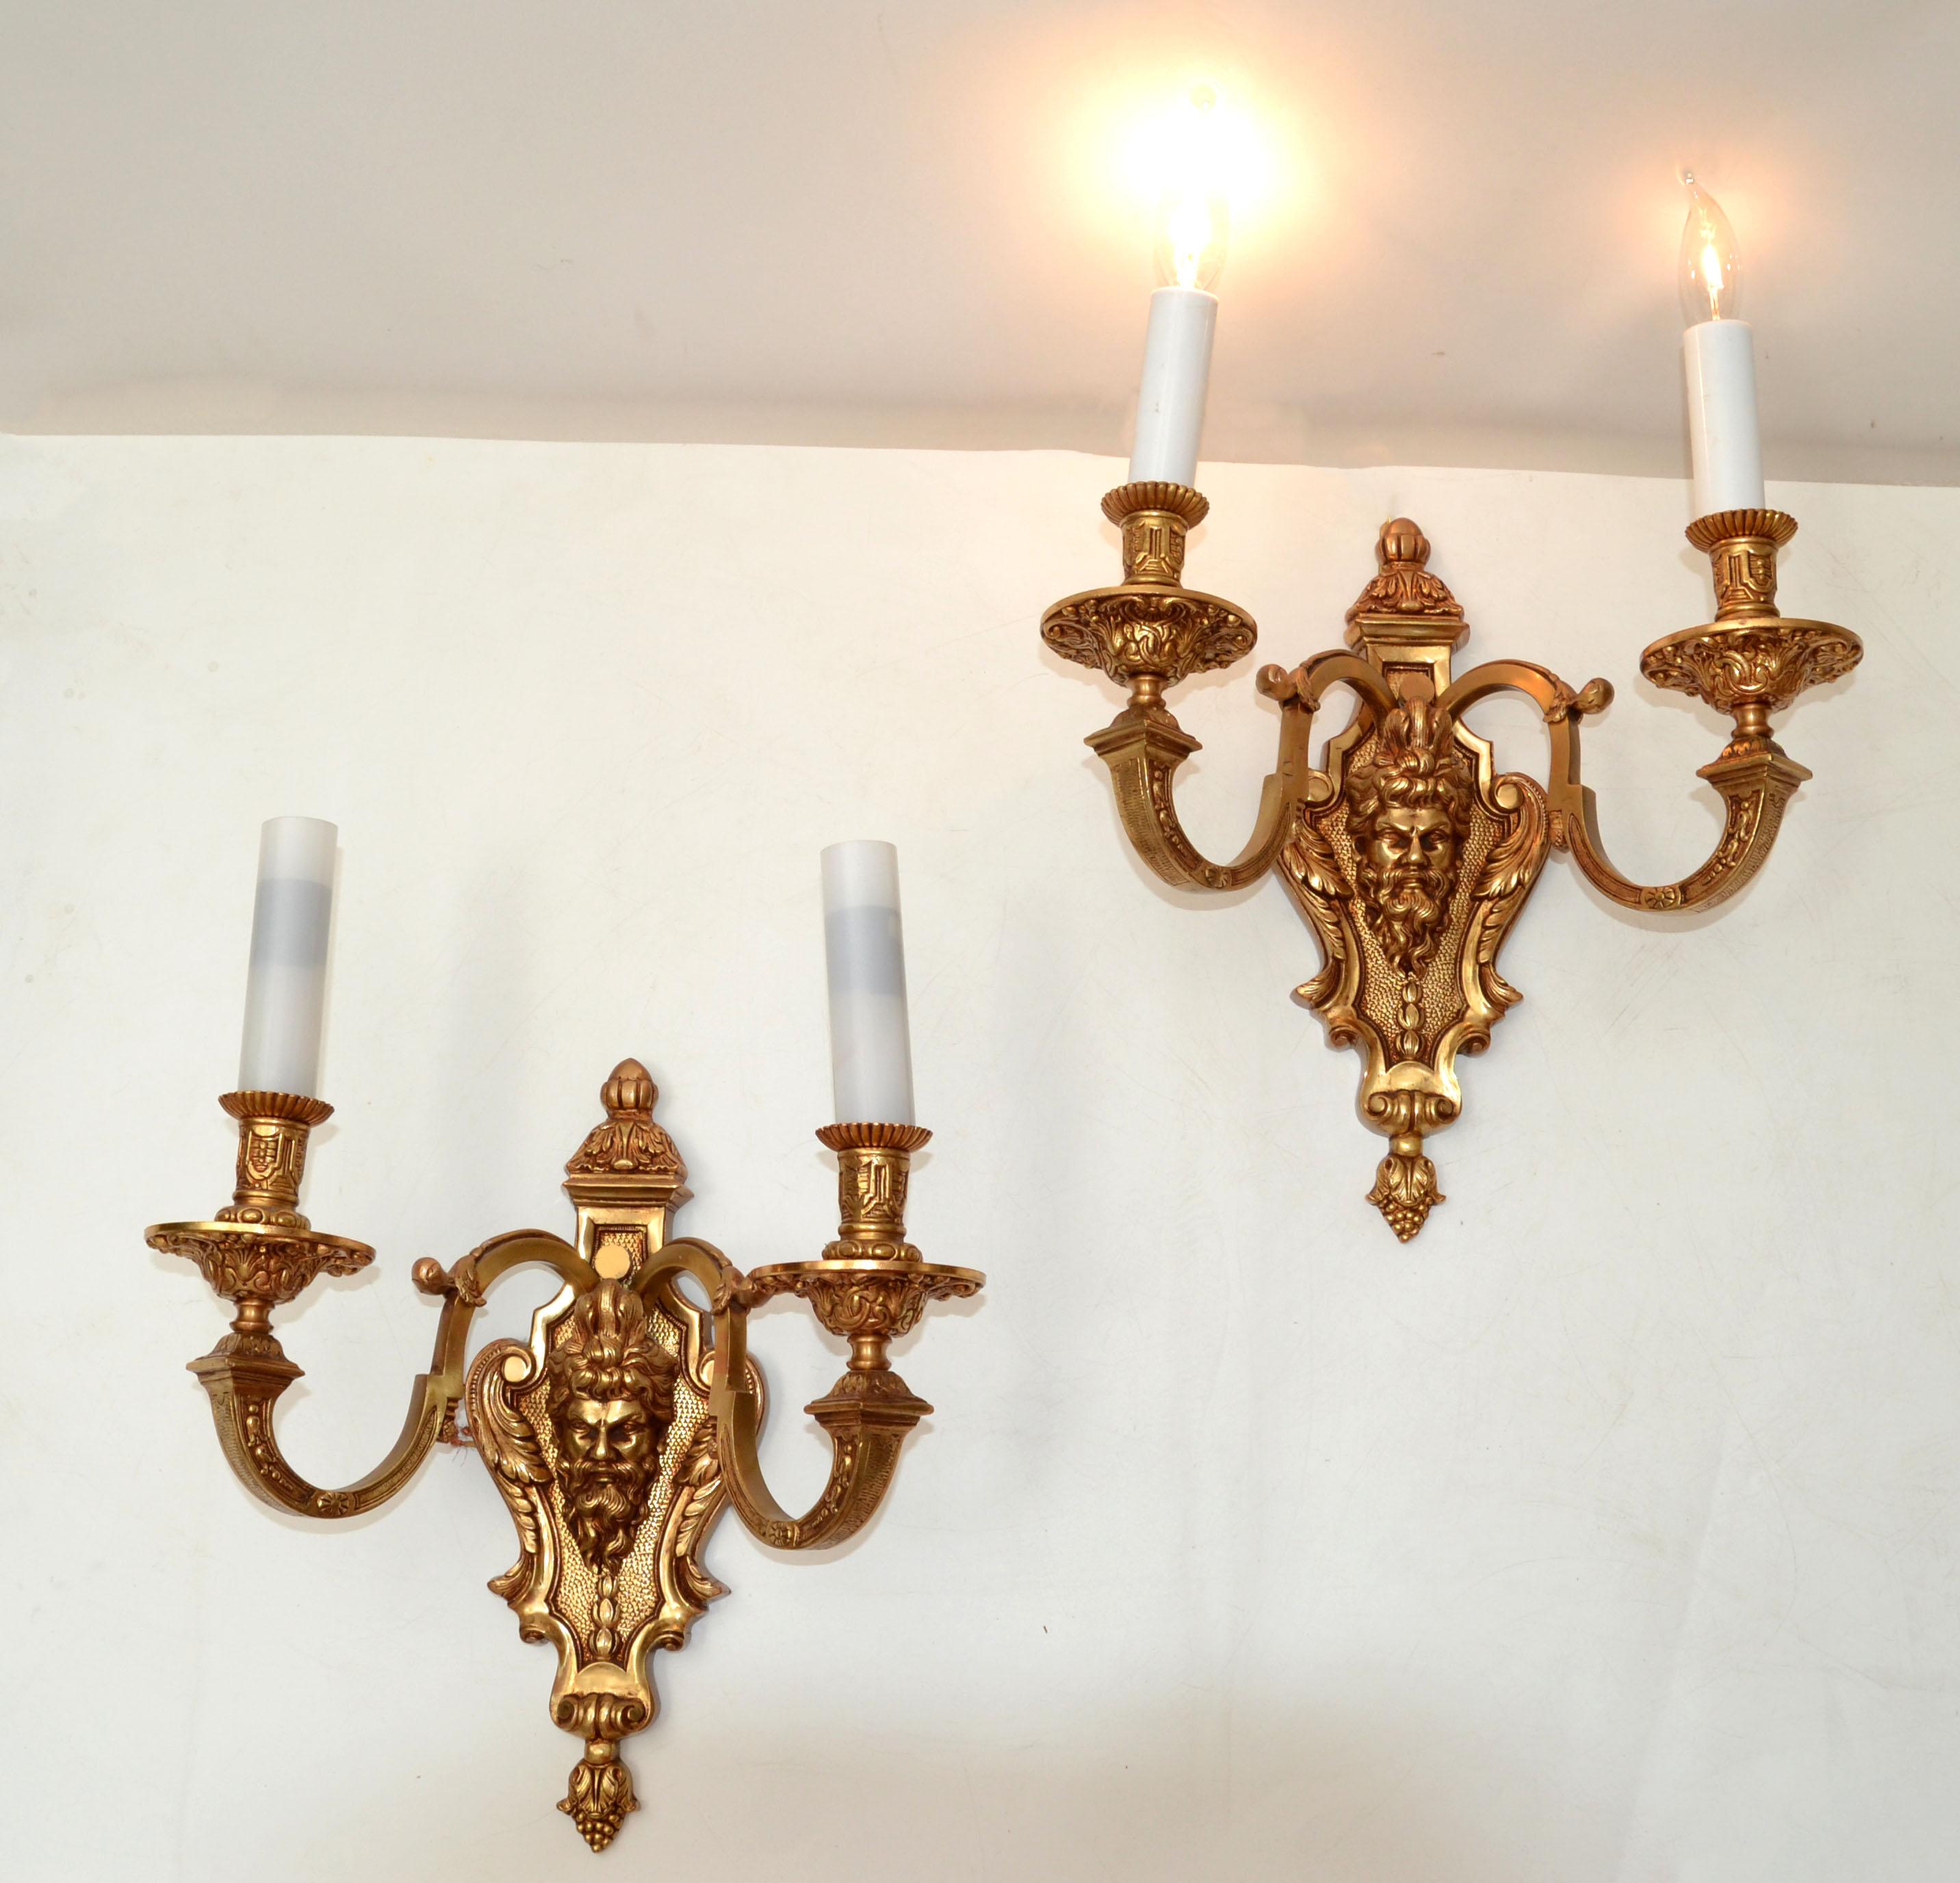 Pair of second Empire heavy 2 light solid polished bronze dore sconces, light fixture, wall lamps from the late 19th century.
Depict face motif in the middle and Grape Finial at the bottom tip.
UL Listed and US wiring and each takes 2 light bulbs